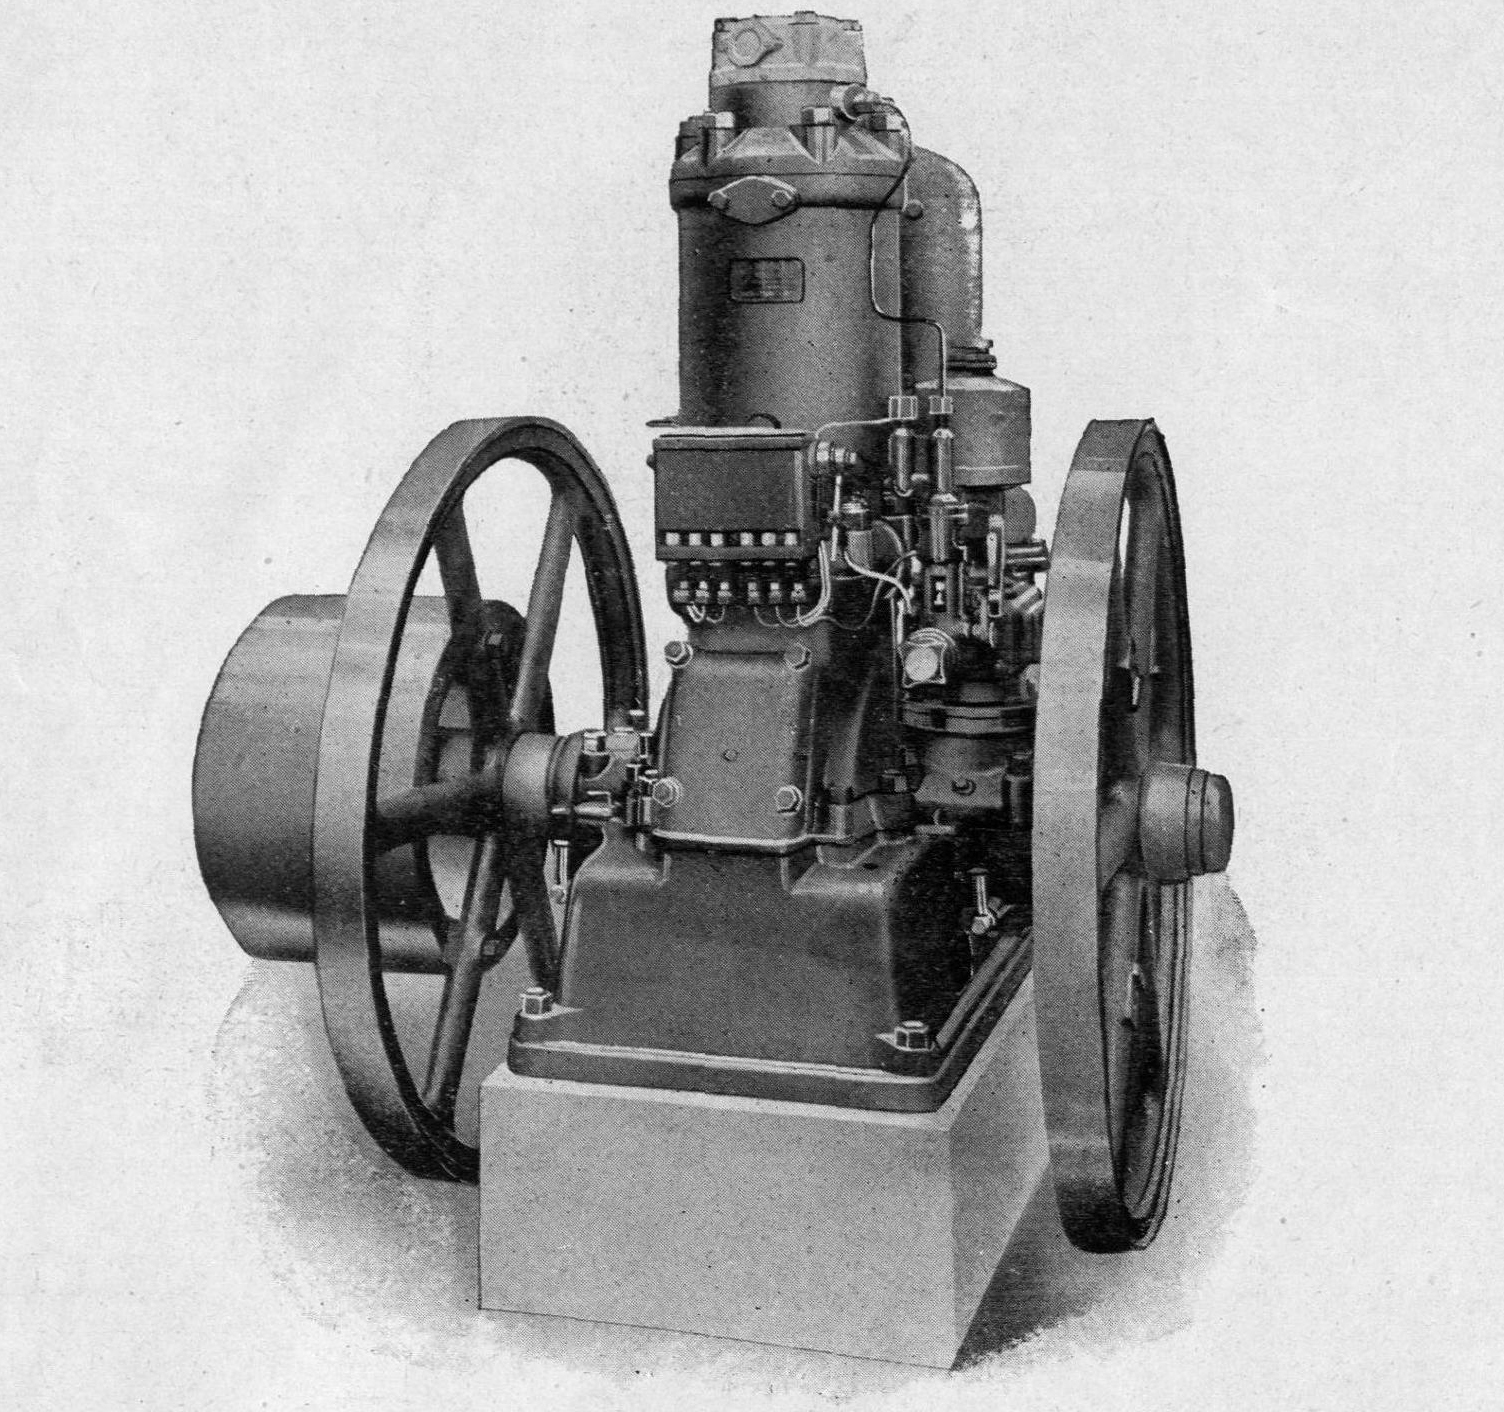 A diesel engine with the product name "Gamma", designed by the Nobels.